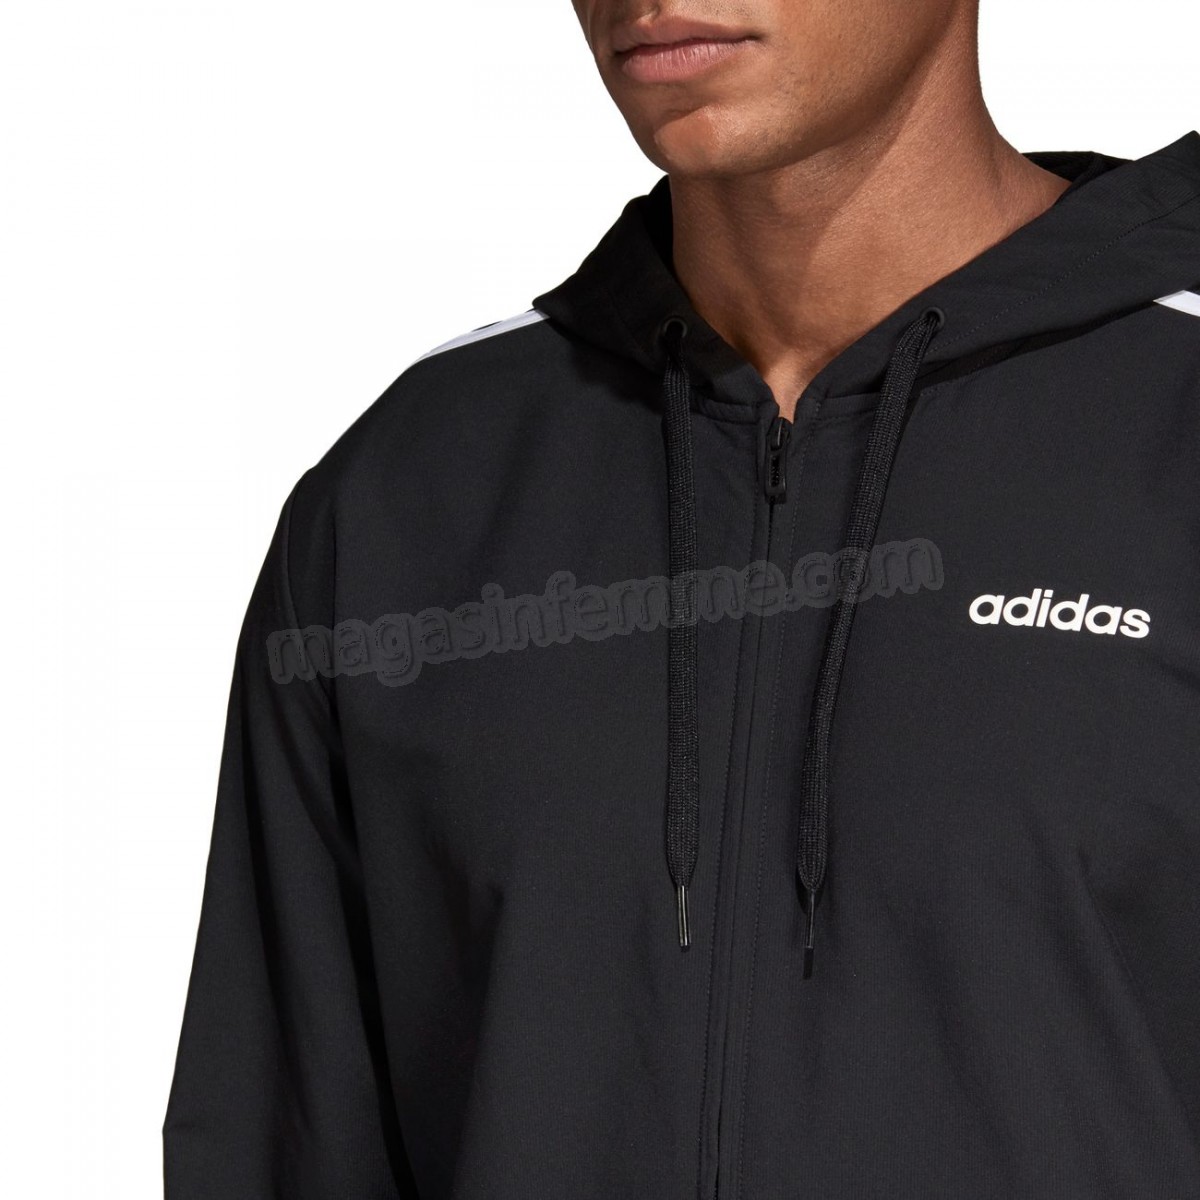 Adidas-Fitness homme ADIDAS Coupe-vent adidas Essentials 3-bandes Woven en solde - -7